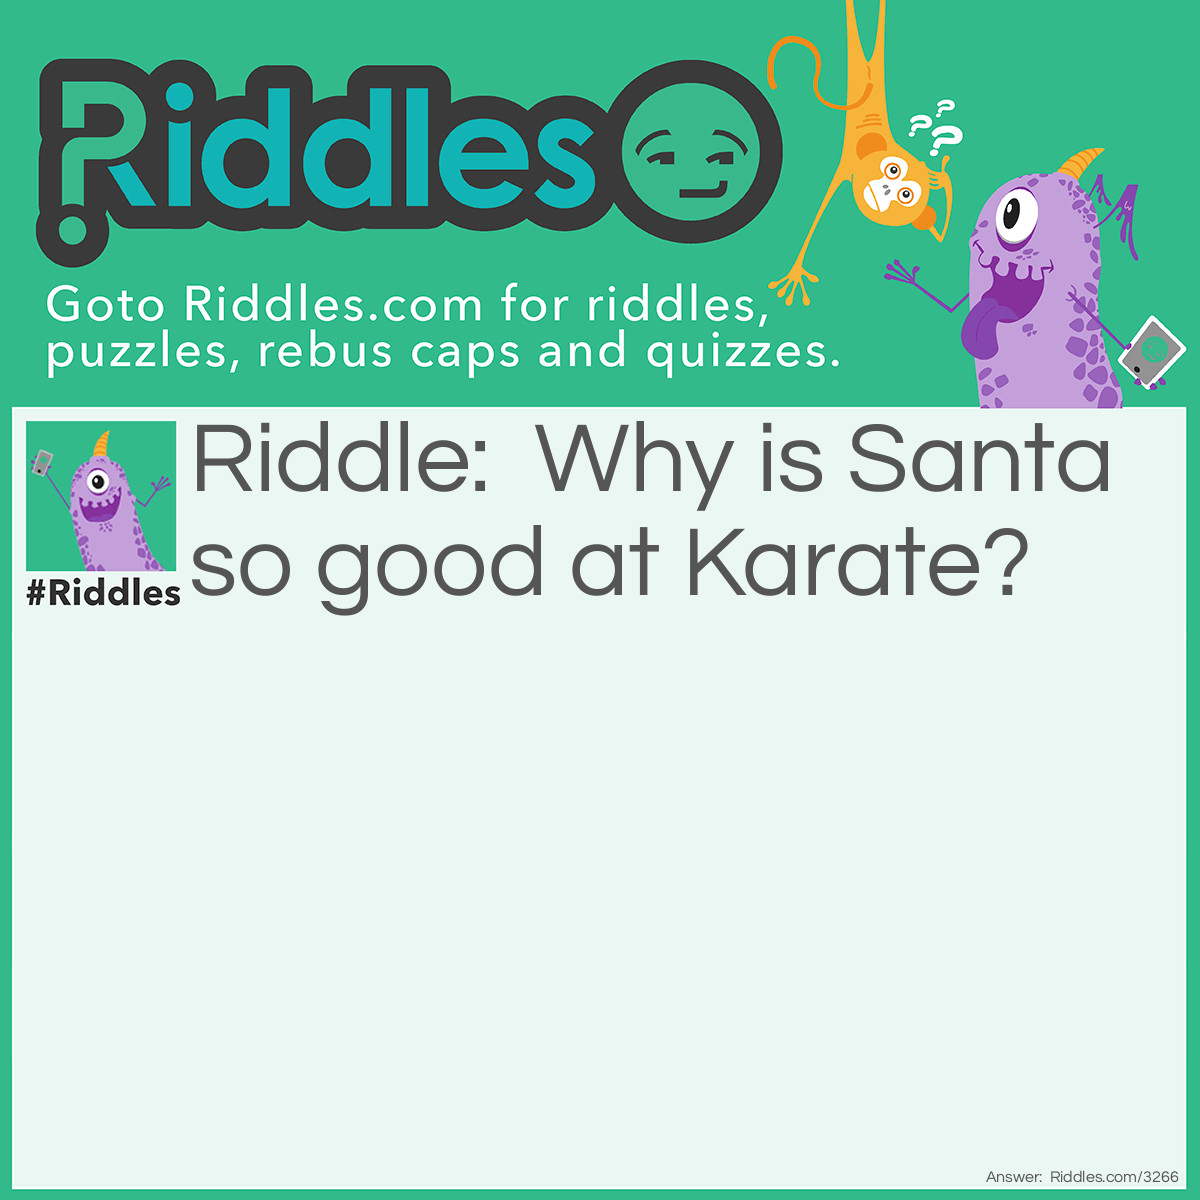 Riddle: Why is Santa so good at Karate? Answer: Because he has a black belt.